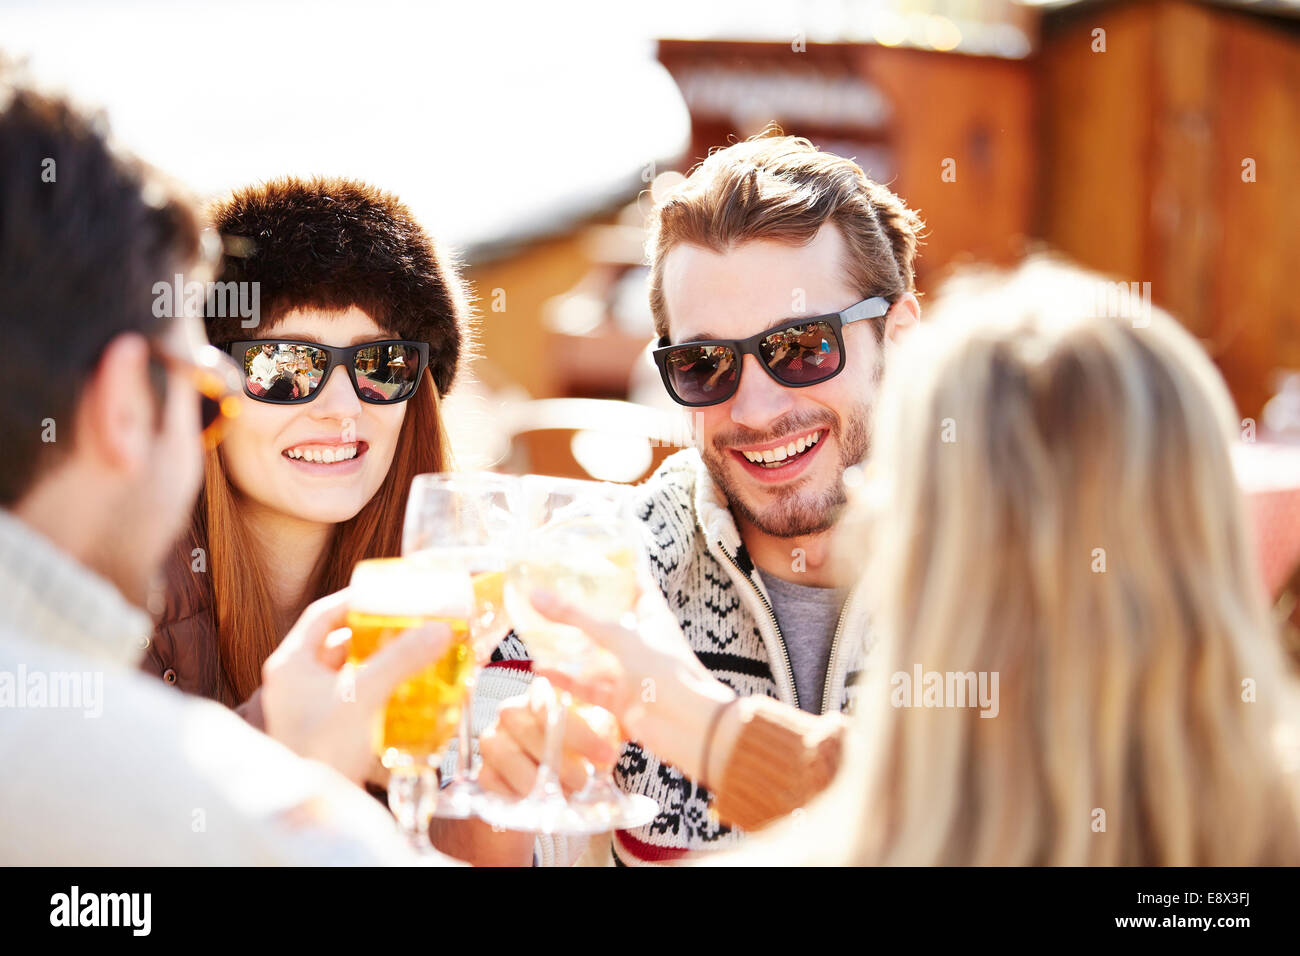 Friends celebrating with drinks in the snow Stock Photo